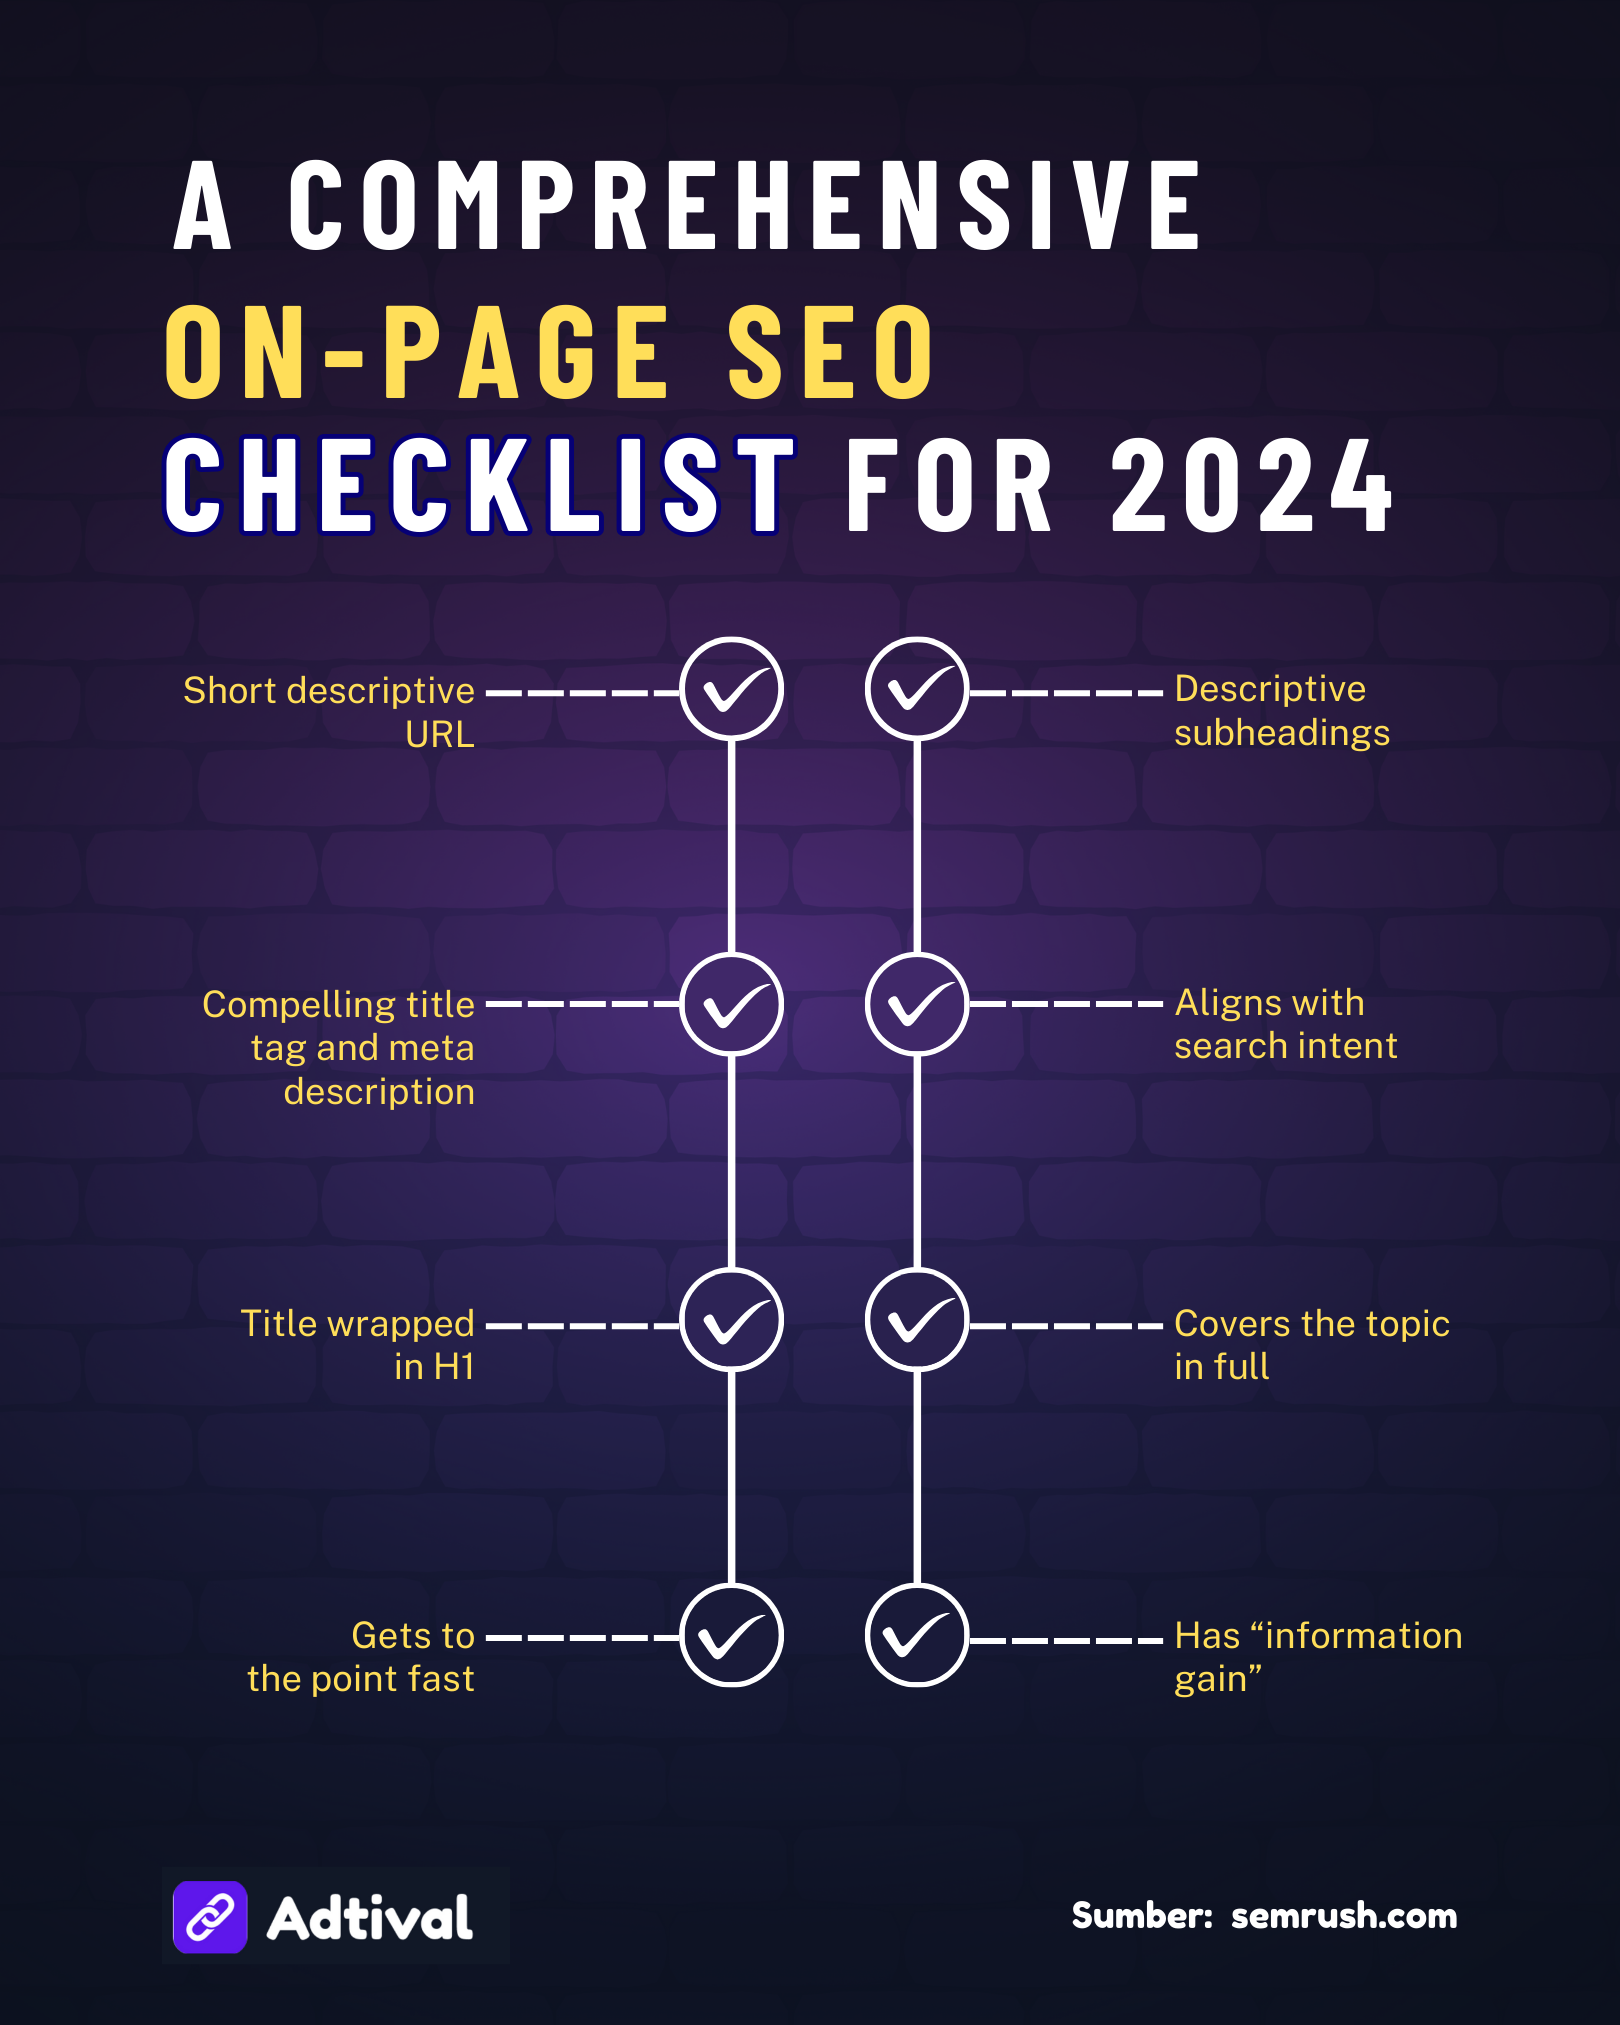 A Comprehensive On-Page SEO Checklist for 2024